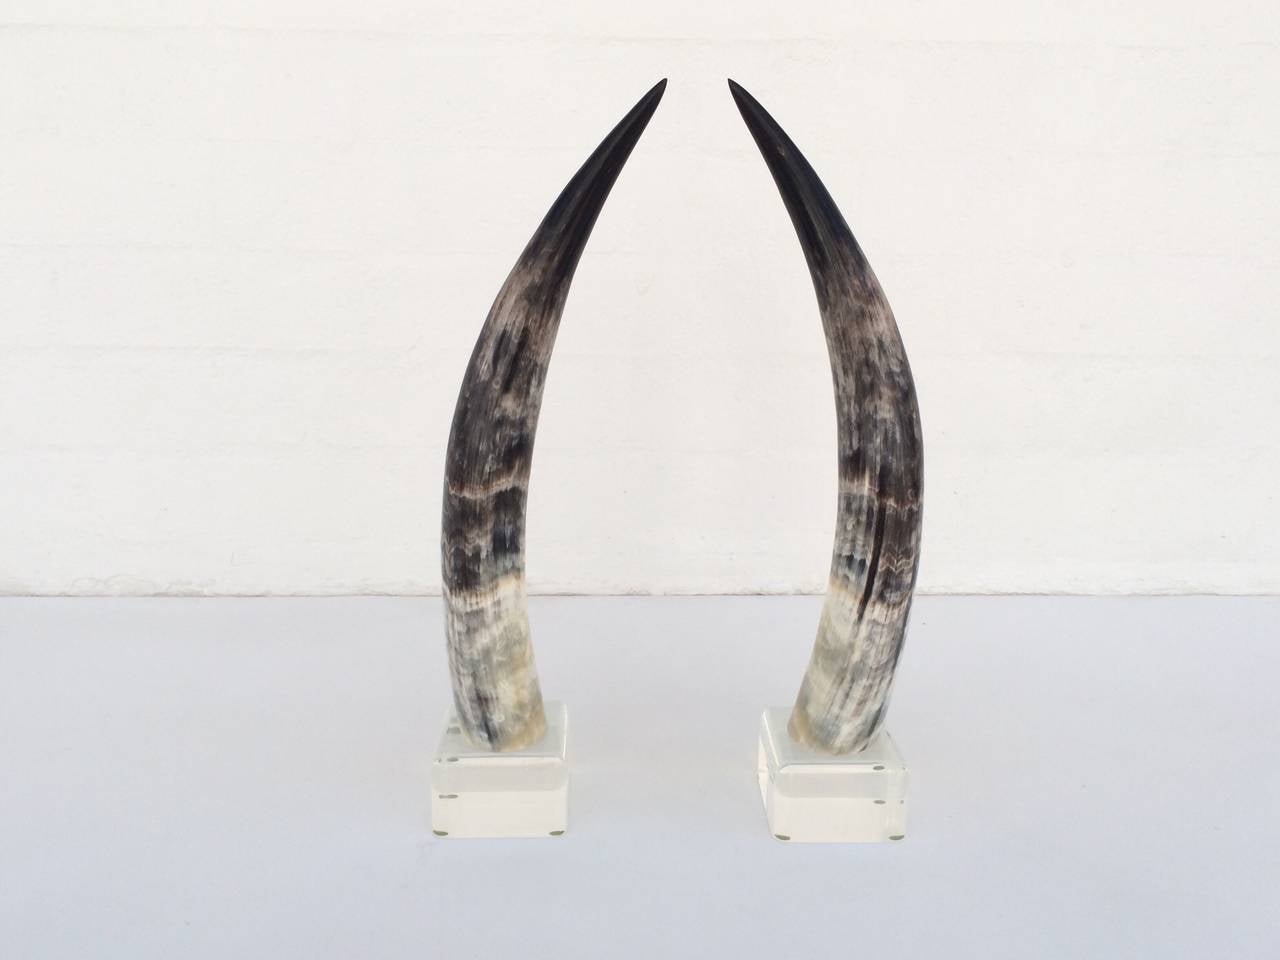 Pair of cut steer horns mounted on acrylic bases.